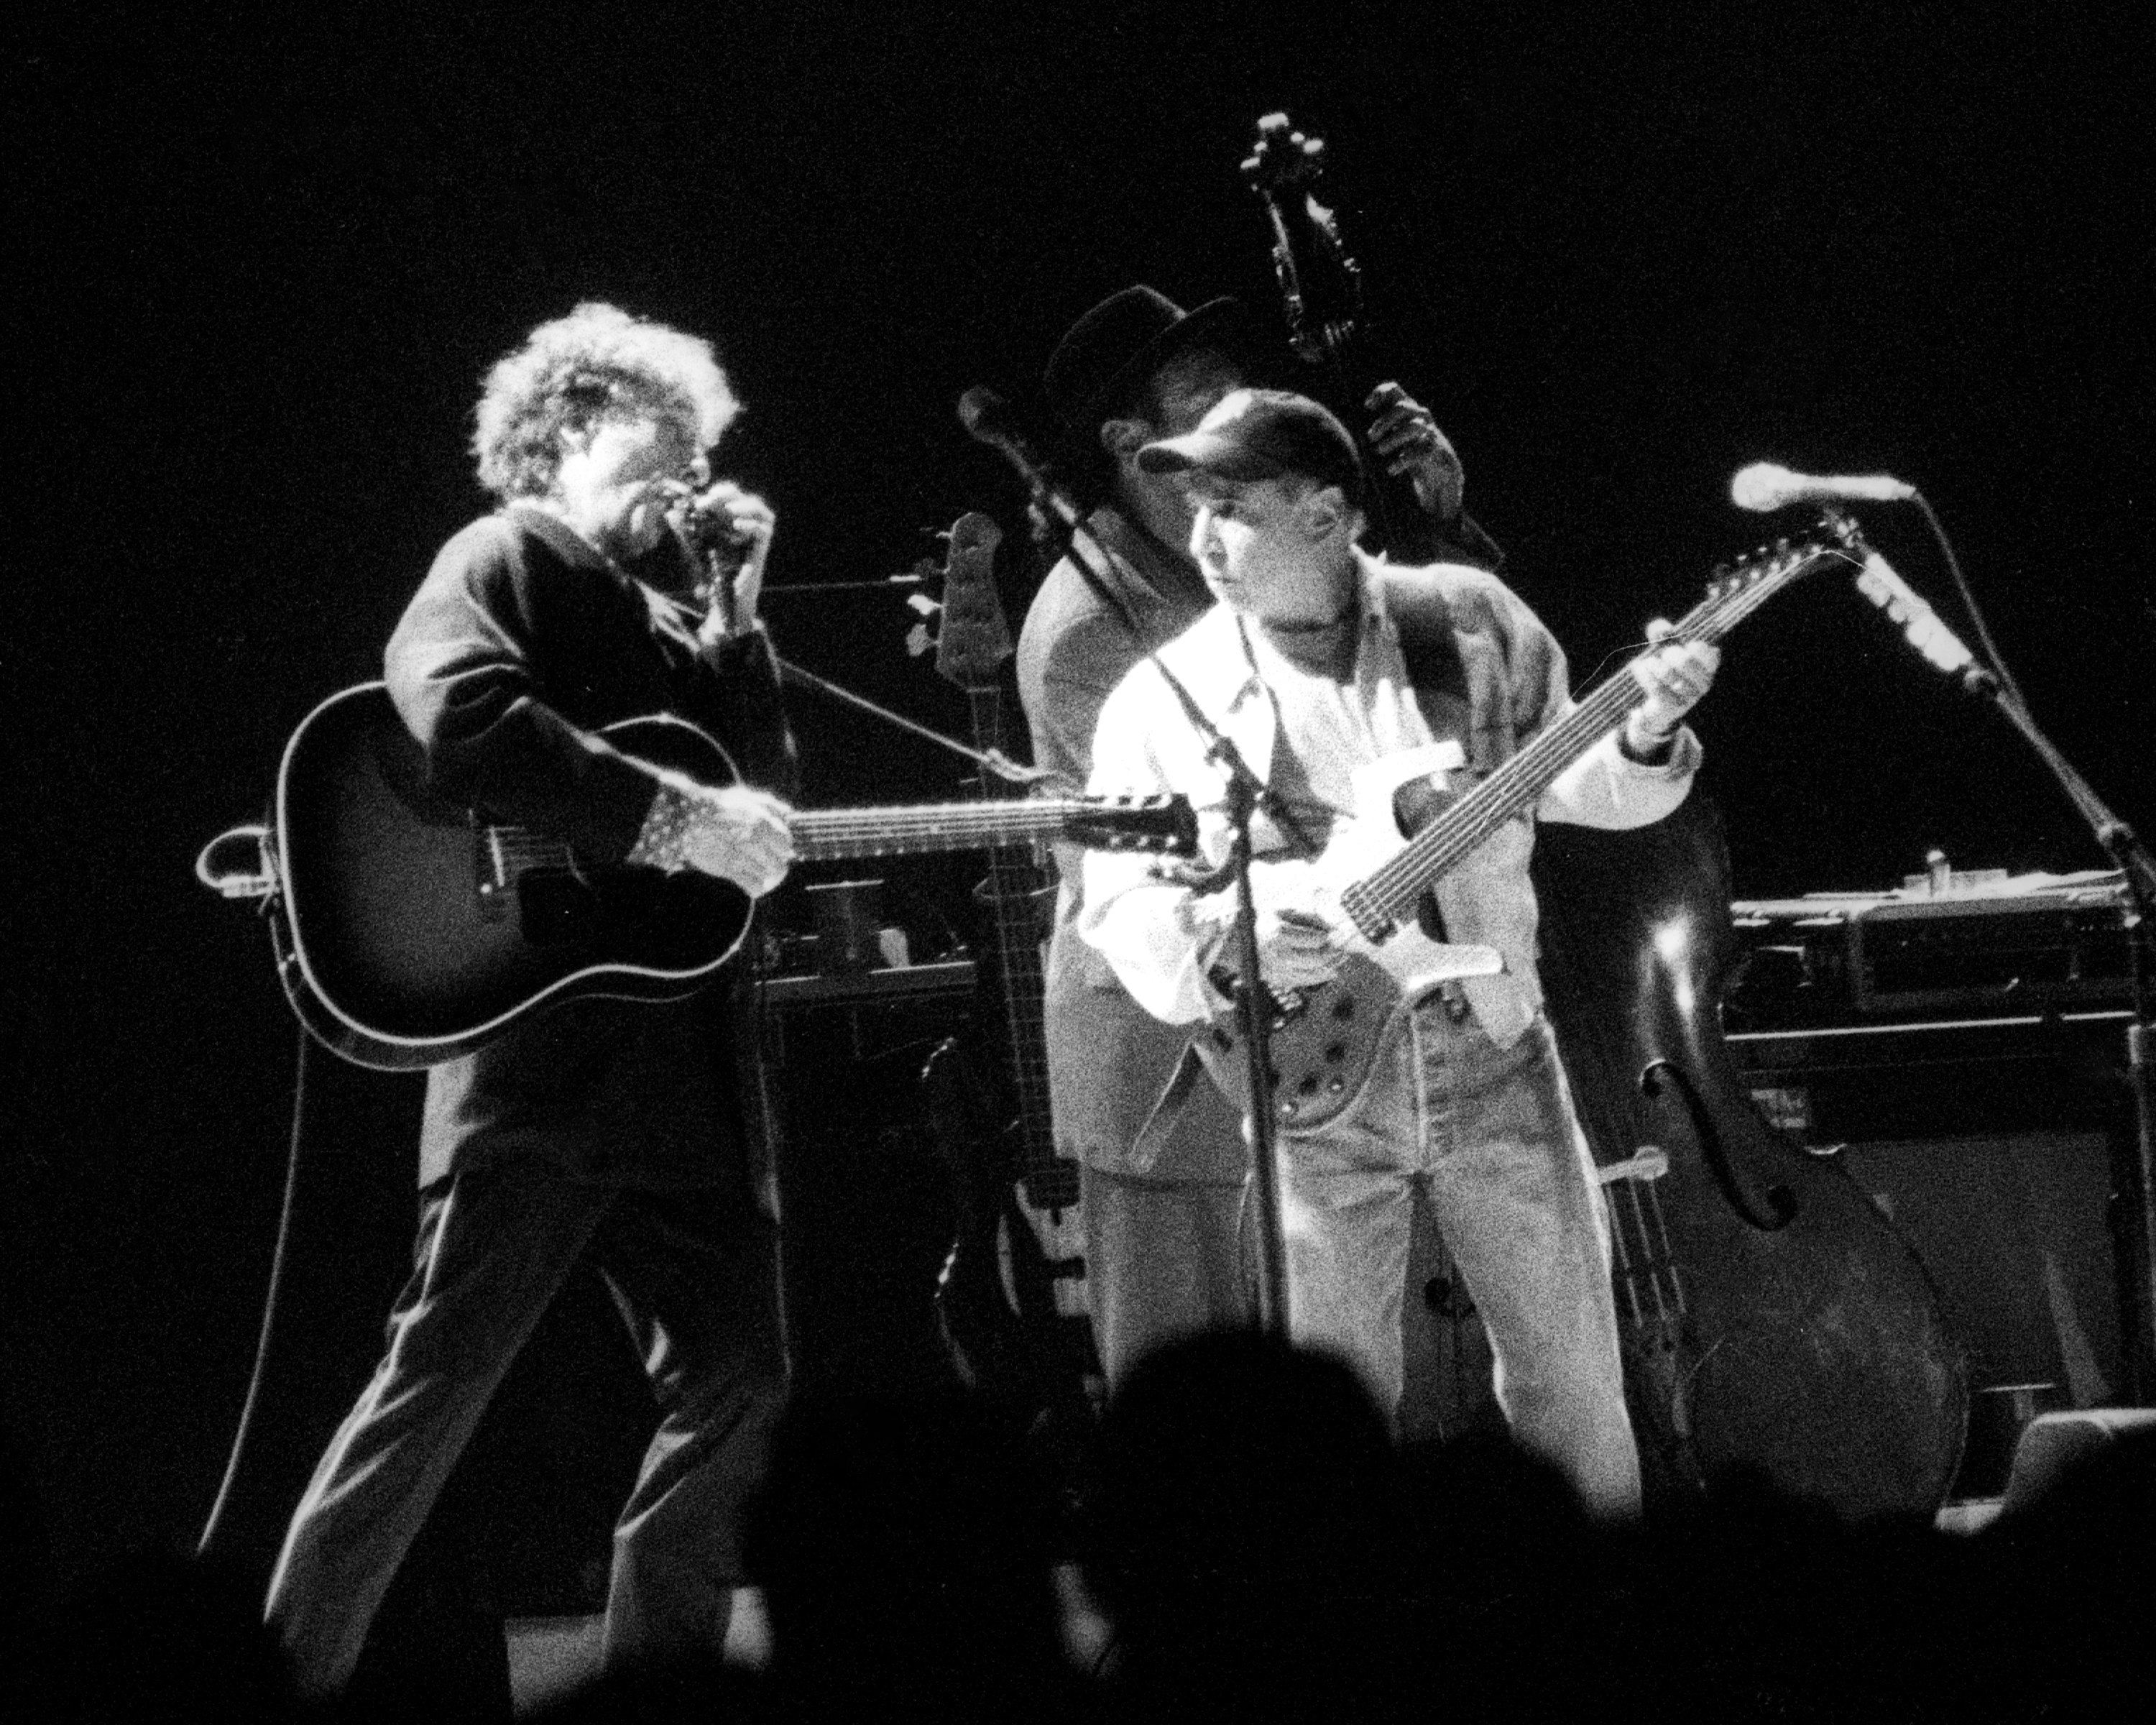 A black and white picture of Bob Dylan and Paul Simon playing guitar onstage together.